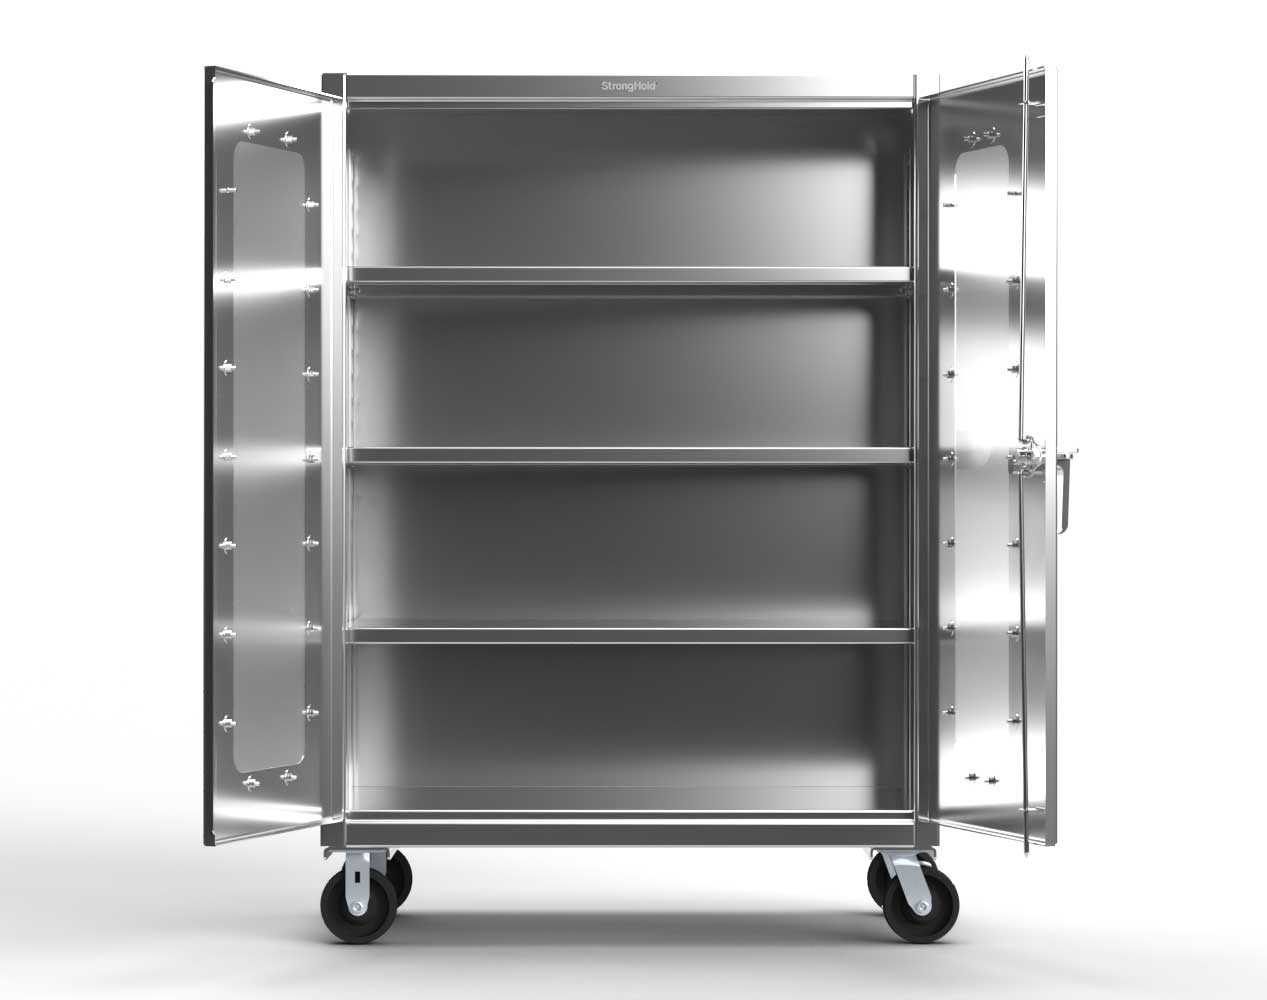 Extreme Duty 12 GA Stainless Steel Mobile Medical Cabinet with Cylinder Lock, 3 Shelves - 48 In. W x 24 In. D x 68 In. H